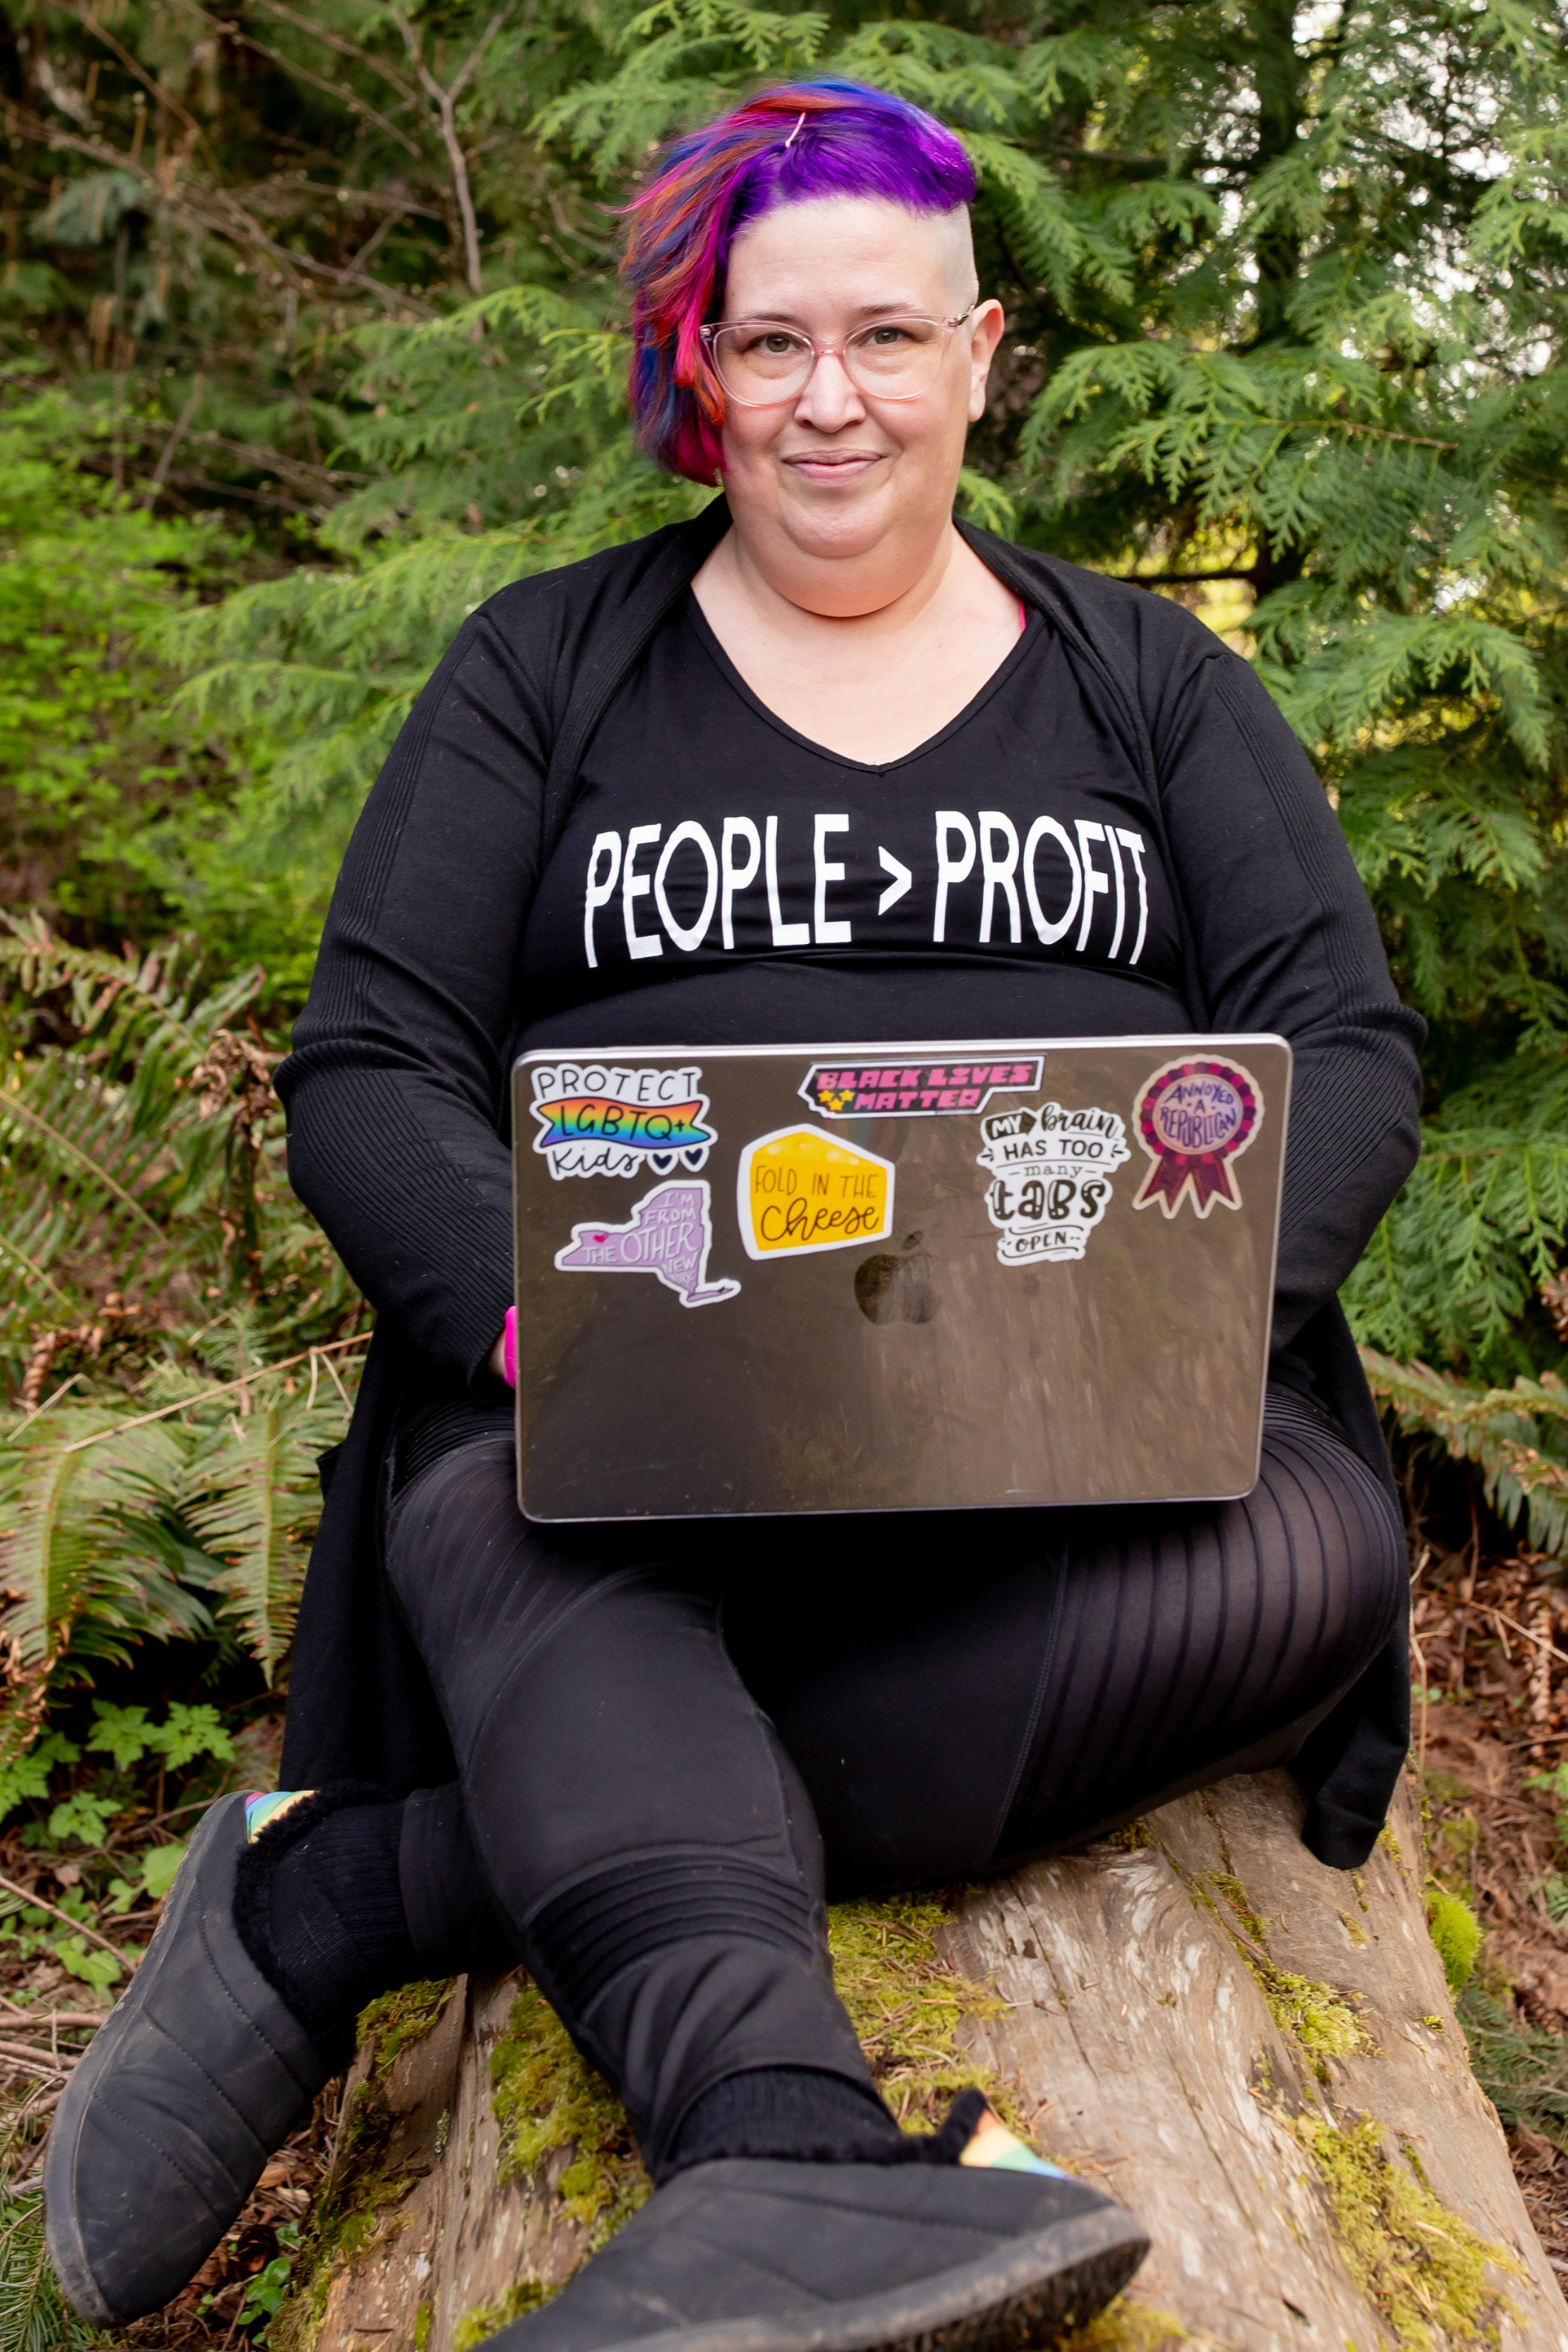 Meg sits on a log in the woods working on her laptop. Her hair is purple and pink and her shirt says "people > profits"